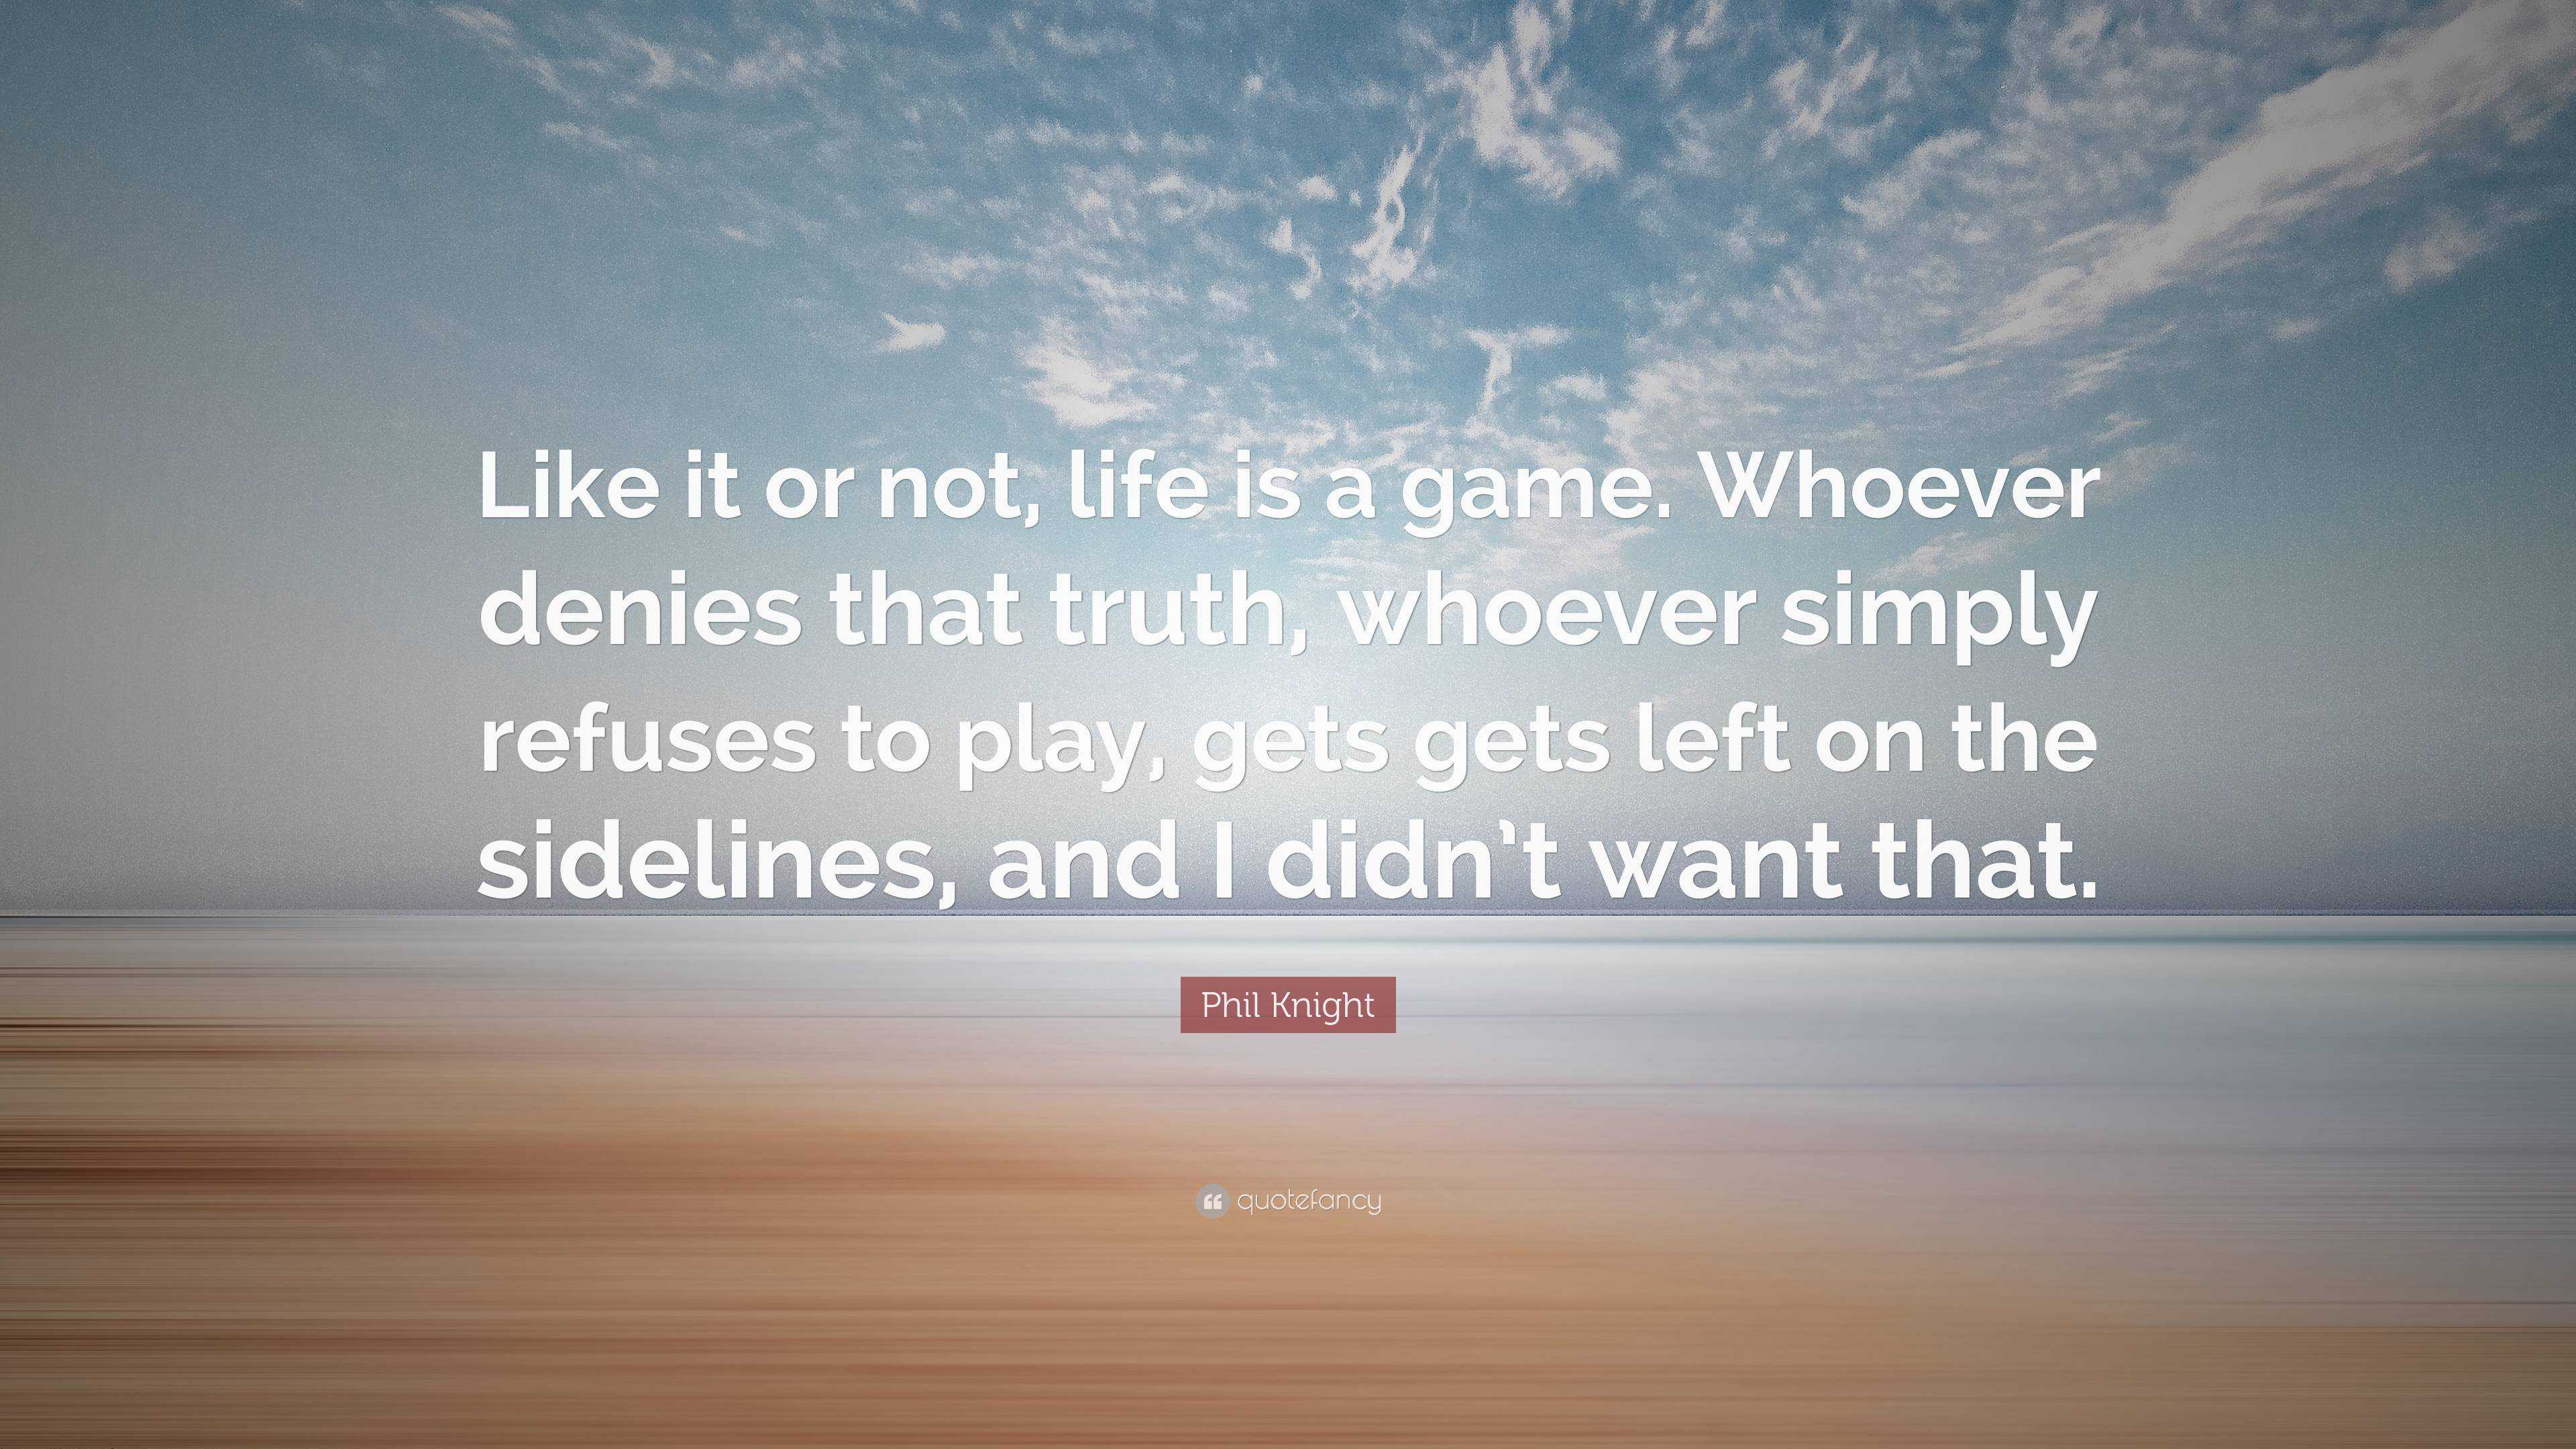 Phil Knight Quote: “Like it or not, life is a game.”